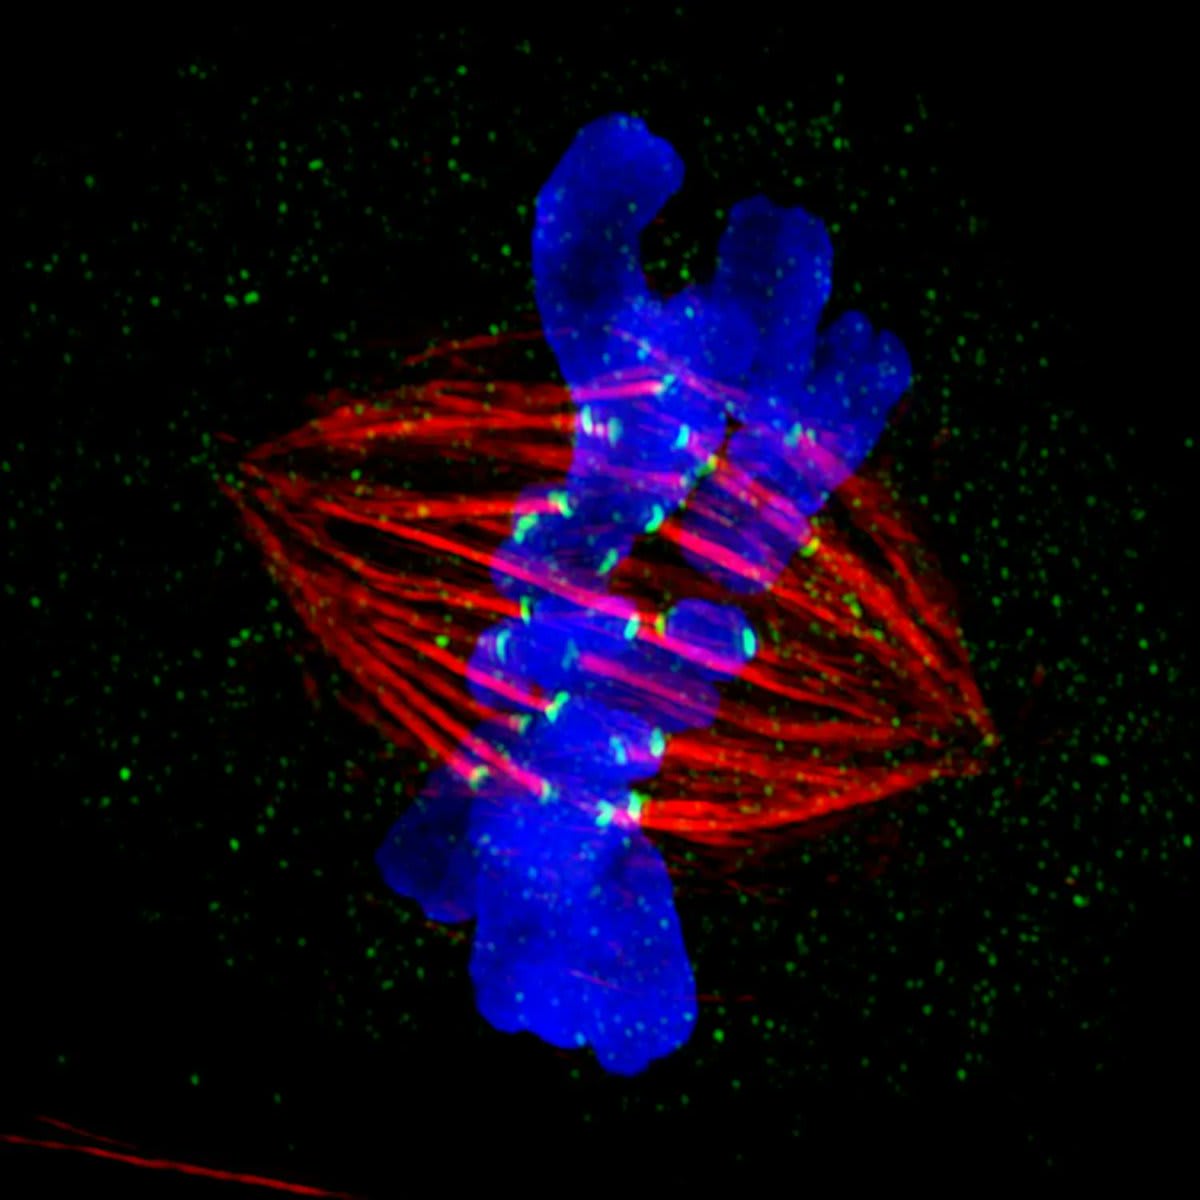 Ghostly blue chromosomes are joined by green kinetochores to supporting red spindles that will drag each of the duplicate genetic molecules into opposite directions, to be encased into newly formed cells, during cell division. 📷 Jane Stout/Indiana University/ZEISS Microscopy